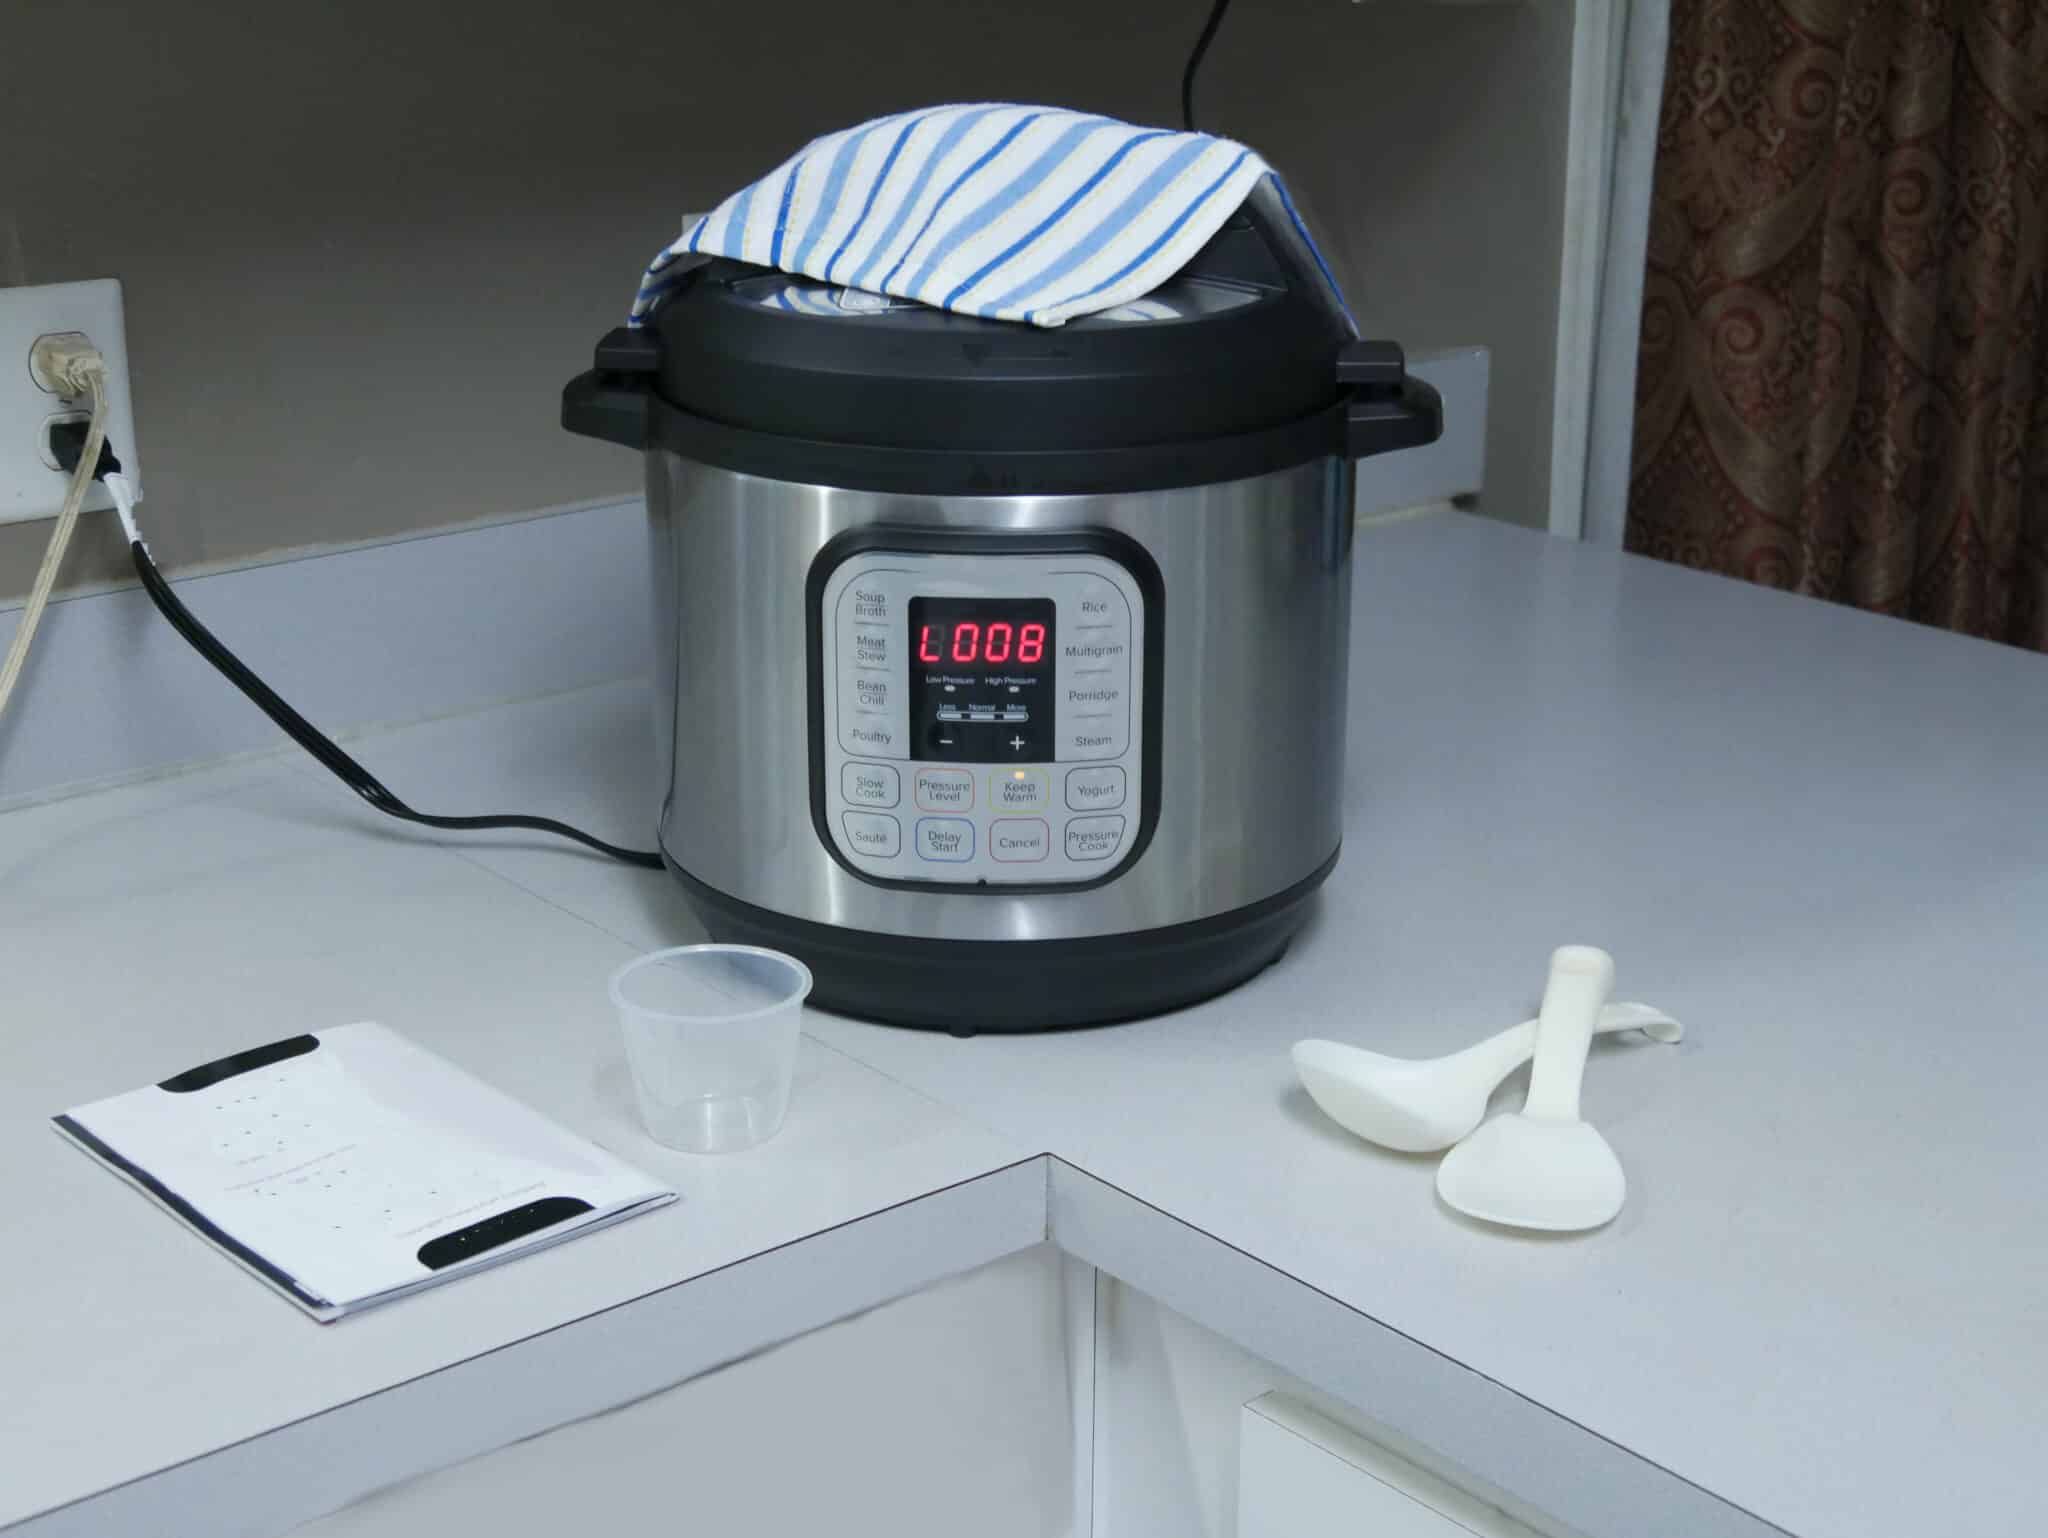 Why Your Instant Pot Is Counting Up Not Down